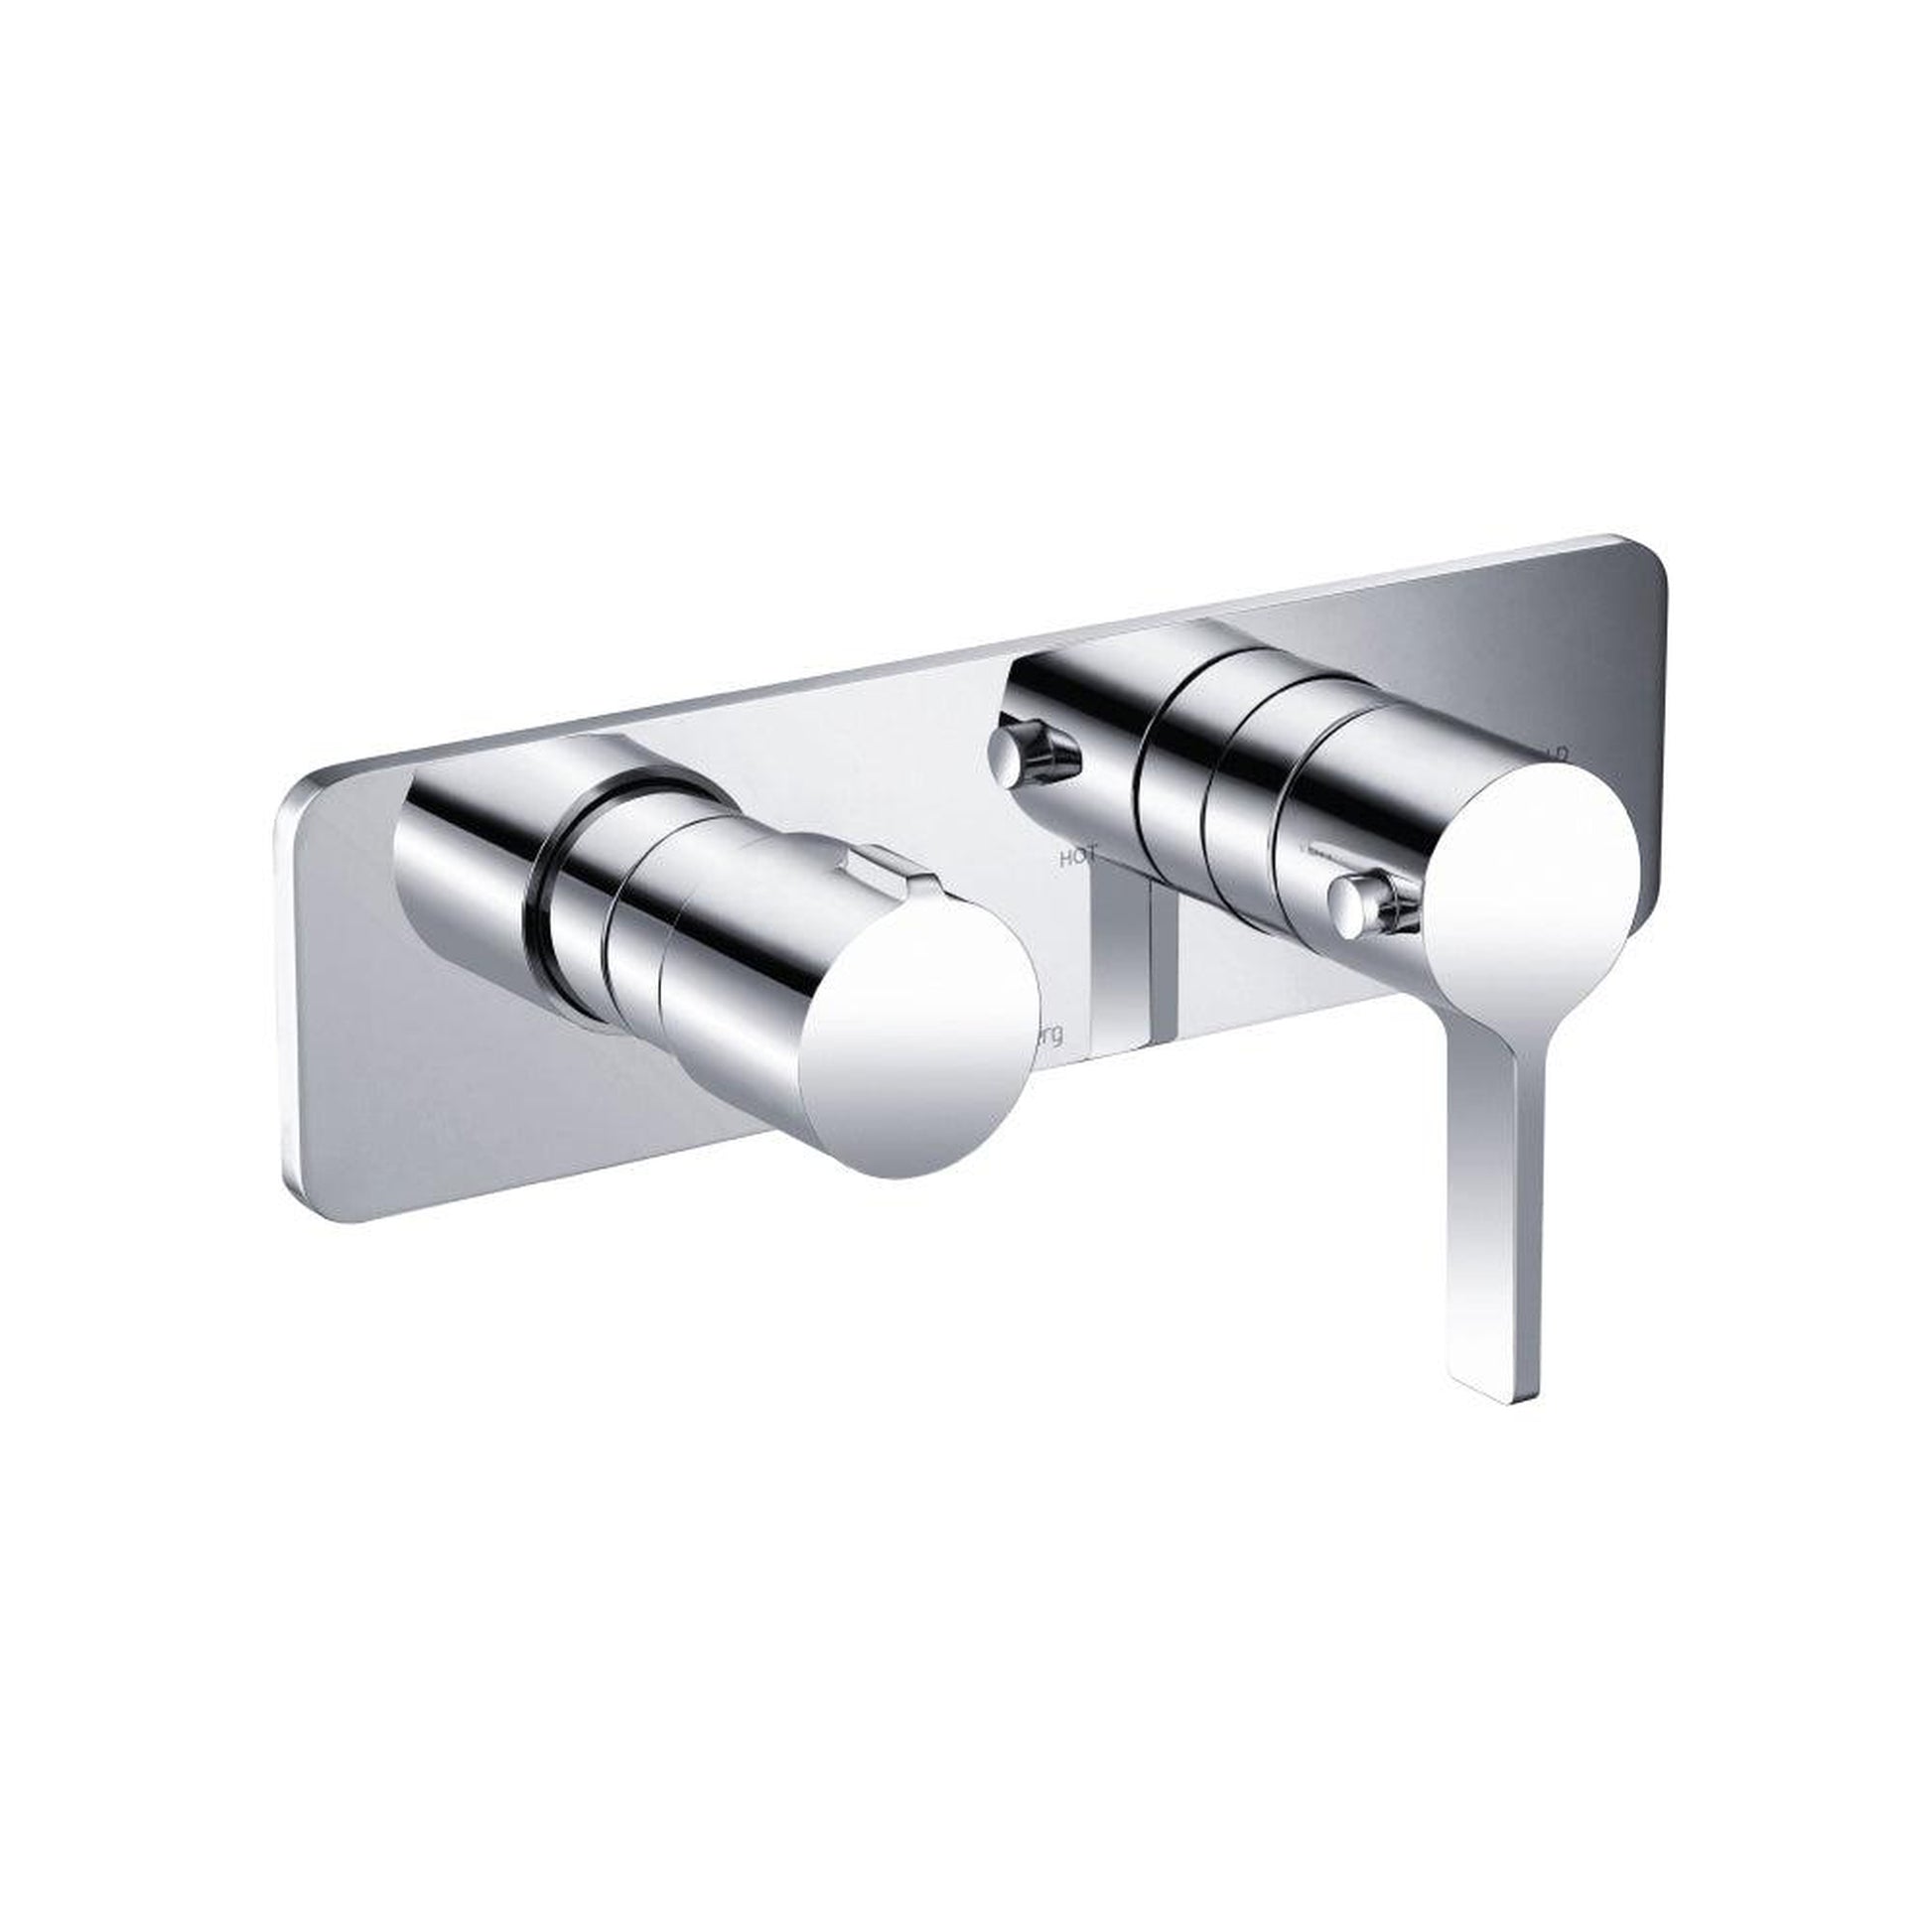 Isenberg Serie 260 Single Output Trim for Thermostatic Valve in Chrome